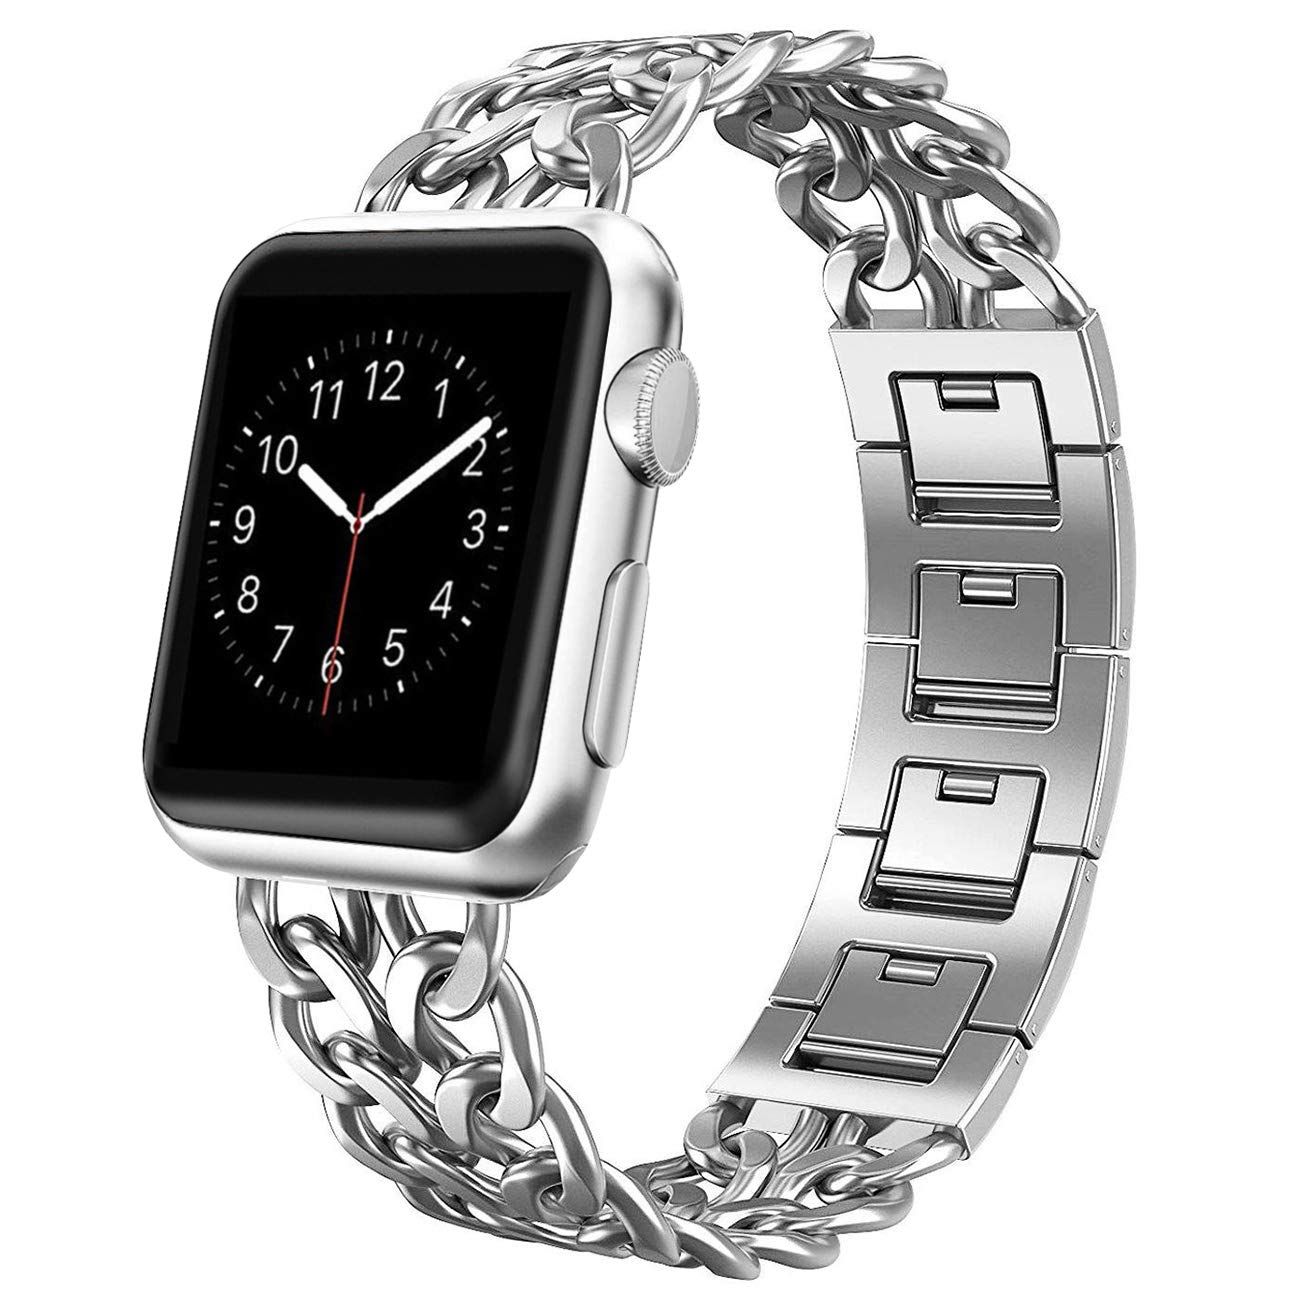 AmzAokay Replacement Bands Compatible for Apple Watch 38mm 42mm Stainless Steel Metal Cowboy Chai... | Amazon (US)